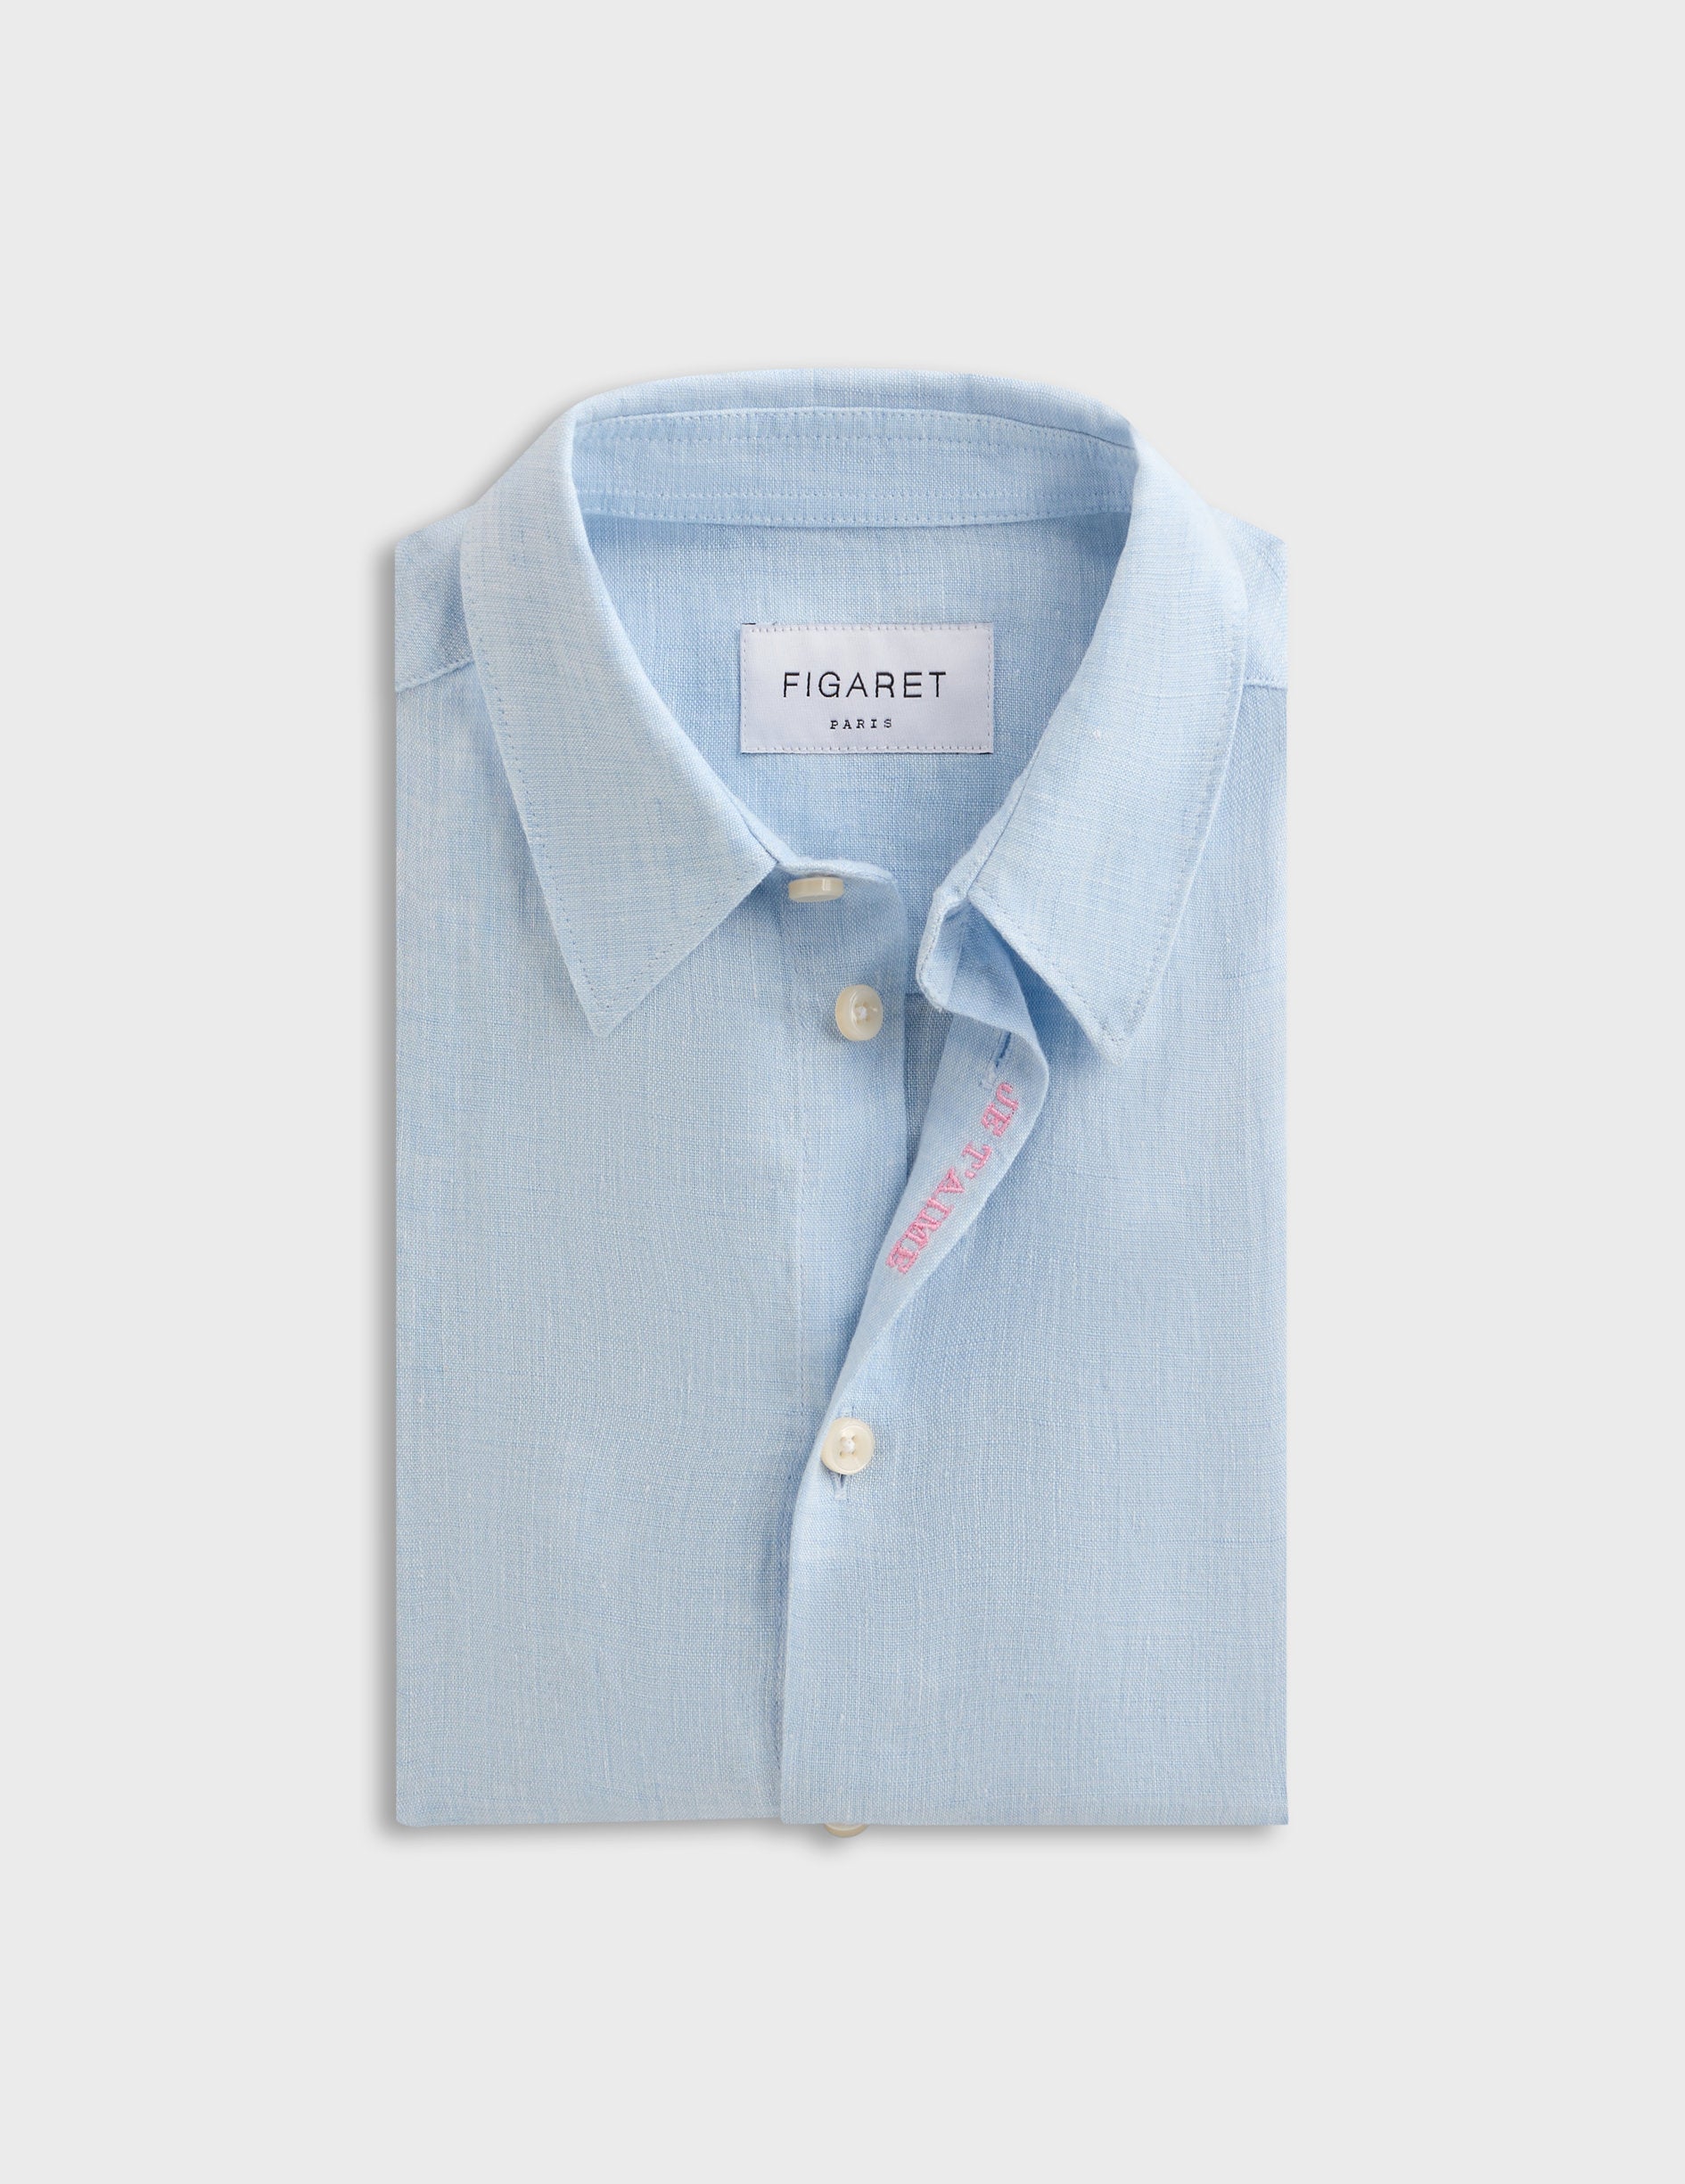 Children's blue "je t'aime" shirt with pink embroidery - Linen - Figaret Collar